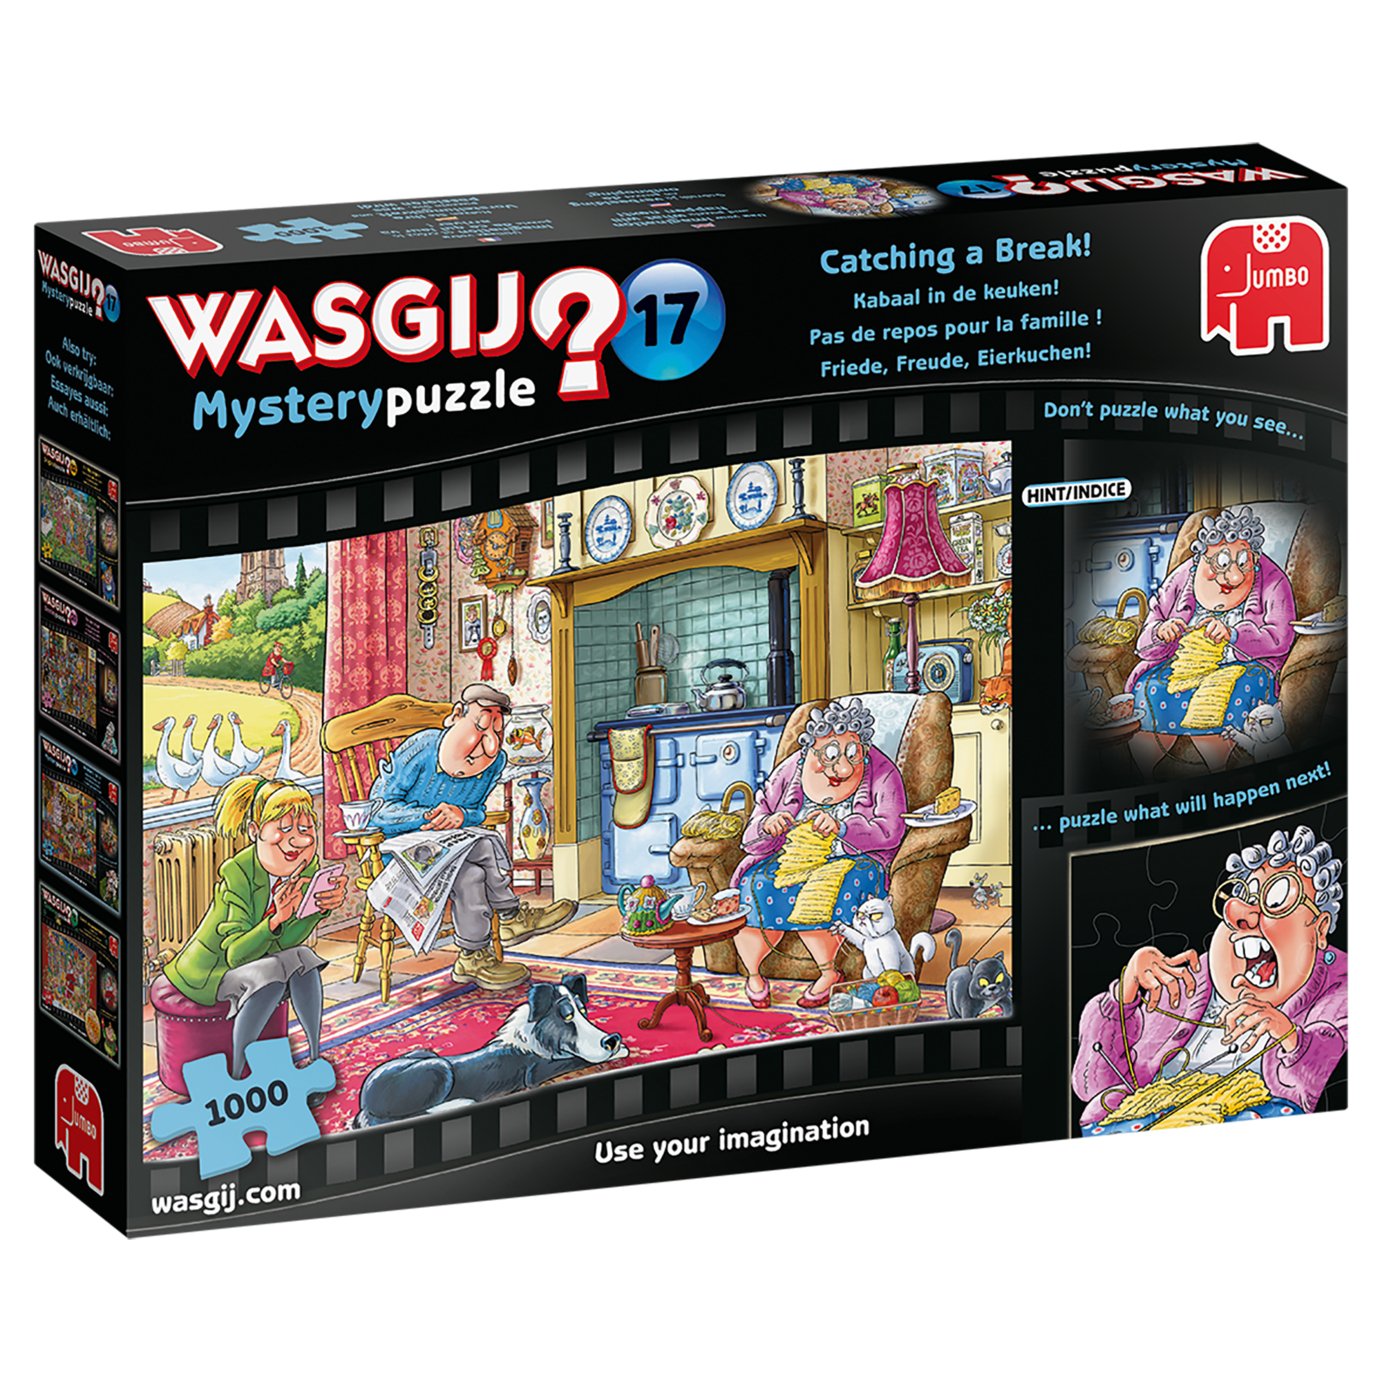 Wasgij Mystery 17 Catching a Break Puzzle Review